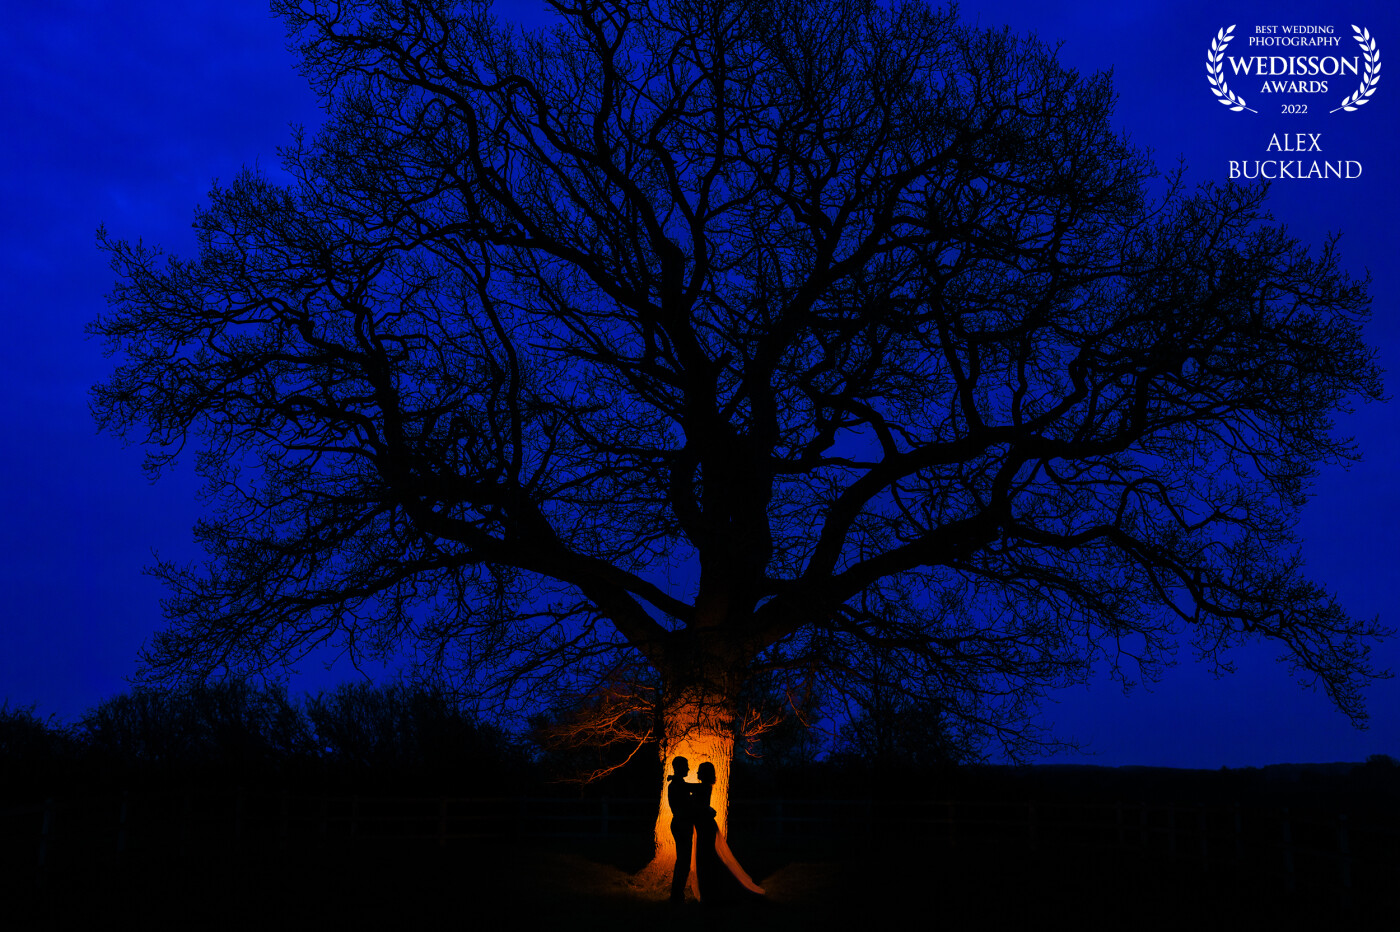 I noticed this incredible tree opposite the venue when I arrived and knew I had to incorporate it somehow later in the day for a creative twilight photo! I asked the couple to stand close to one another in front of the tree, I then fired a flash using a full CTO gel towards the tree to silhouette the couple, whilst also reducing the white balance to enhance the blue hour of the sky!